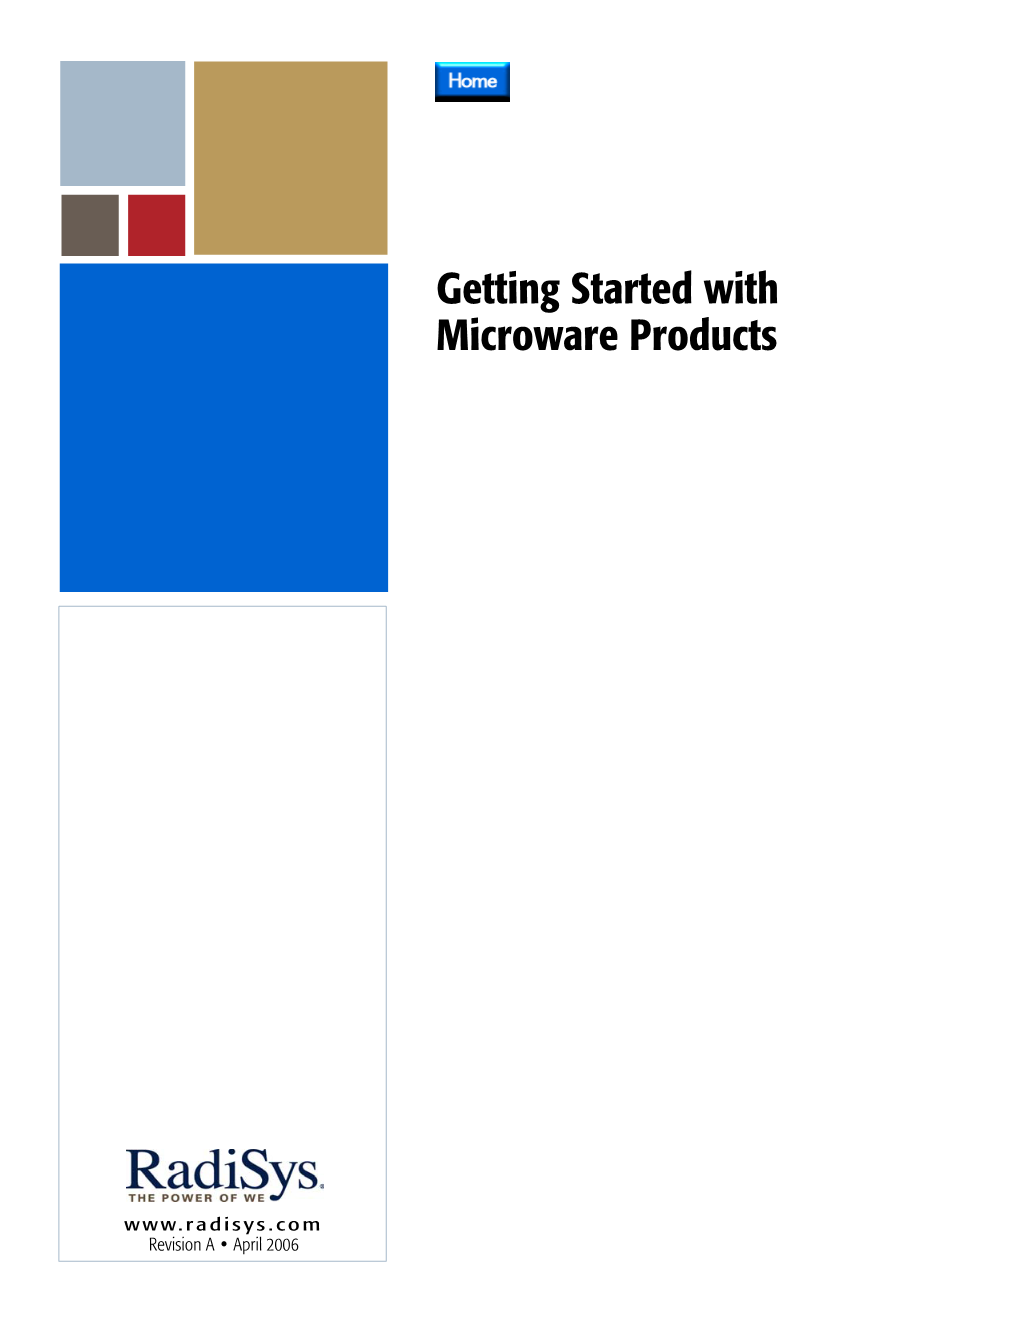 Getting Started with Microware Products